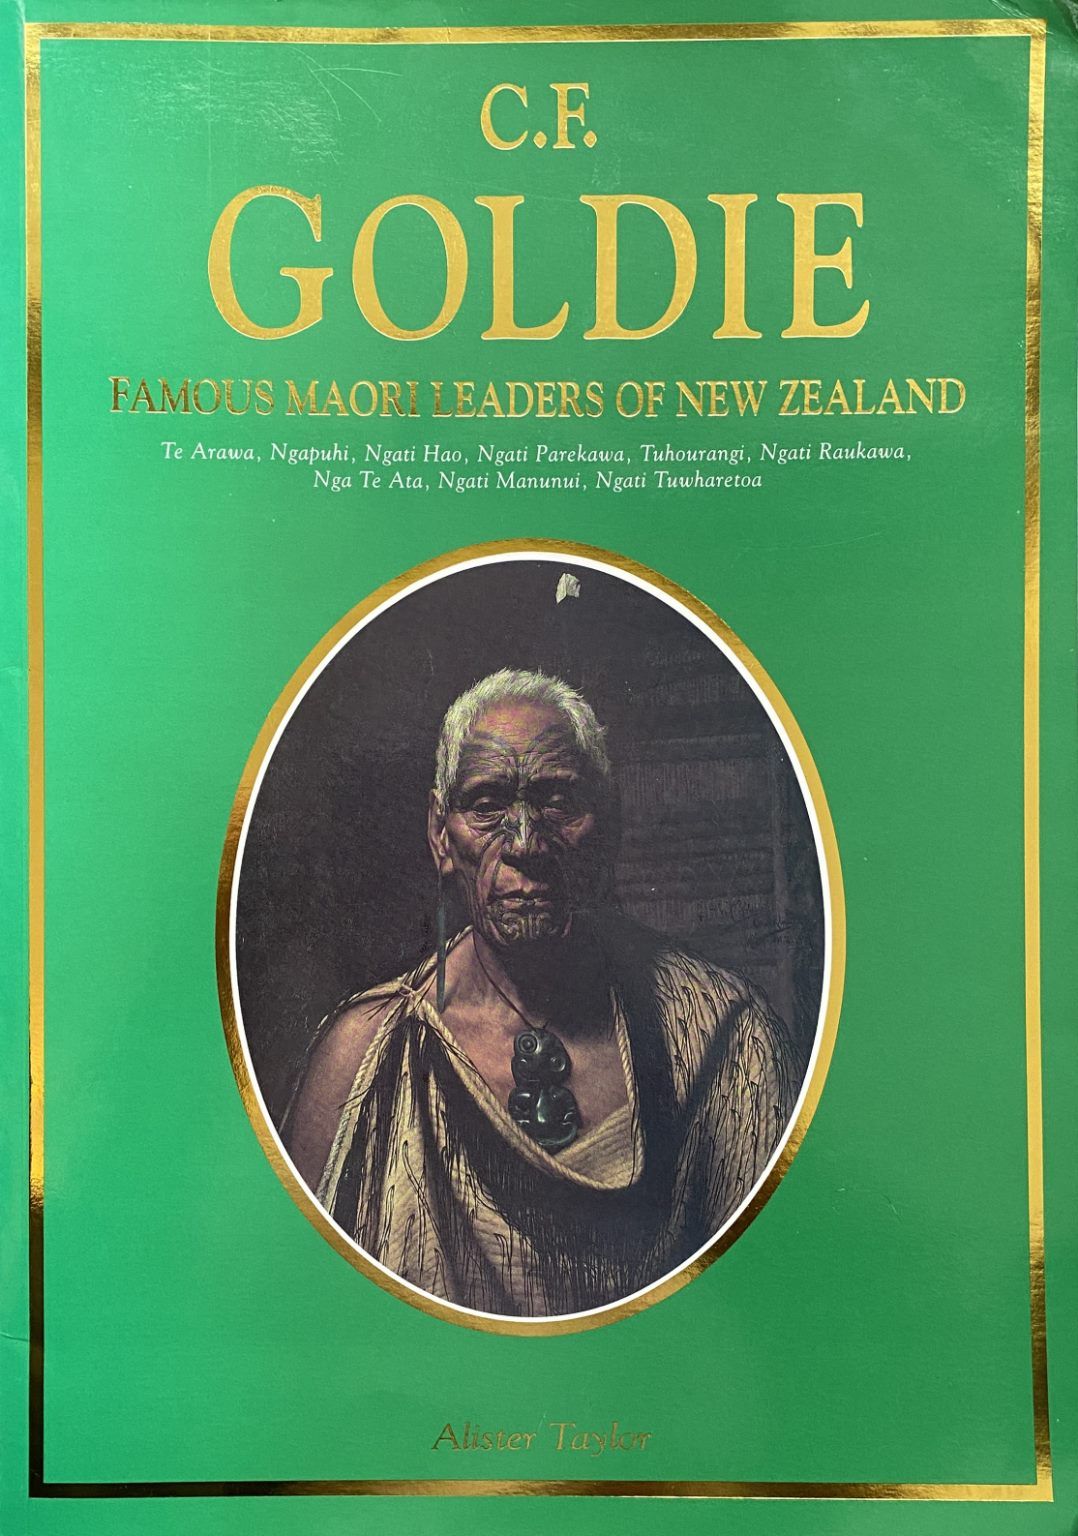 C. F. GOLDIE: Famous Maori Leaders of New Zealand